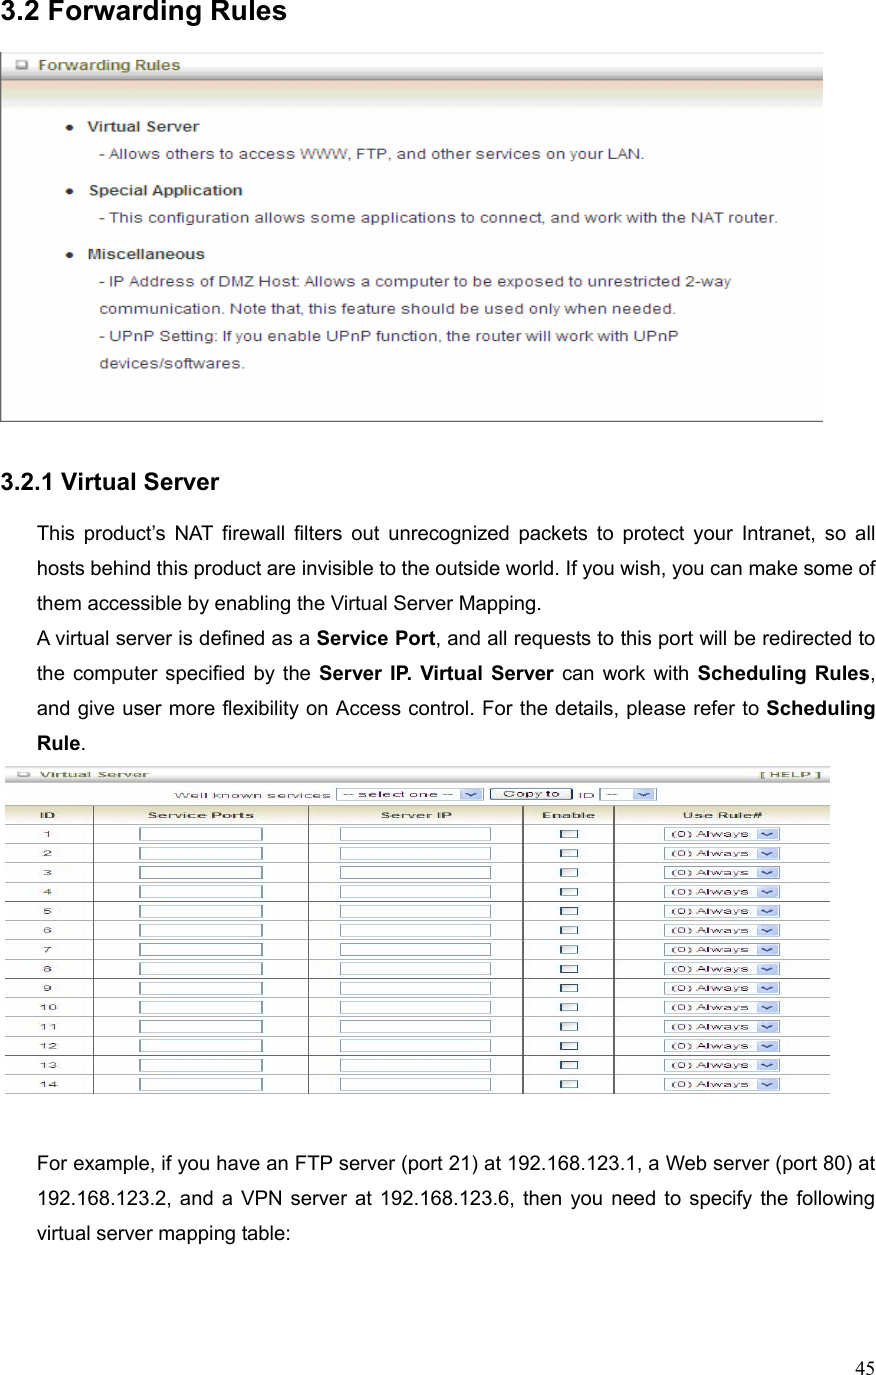  453.2 Forwarding Rules     3.2.1 Virtual Server  This product’s NAT firewall filters out unrecognized packets to protect your Intranet, so all hosts behind this product are invisible to the outside world. If you wish, you can make some of them accessible by enabling the Virtual Server Mapping. A virtual server is defined as a Service Port, and all requests to this port will be redirected to the computer specified by the Server IP. Virtual Server can work with Scheduling Rules, and give user more flexibility on Access control. For the details, please refer to Scheduling Rule.    For example, if you have an FTP server (port 21) at 192.168.123.1, a Web server (port 80) at 192.168.123.2, and a VPN server at 192.168.123.6, then you need to specify the following virtual server mapping table:   